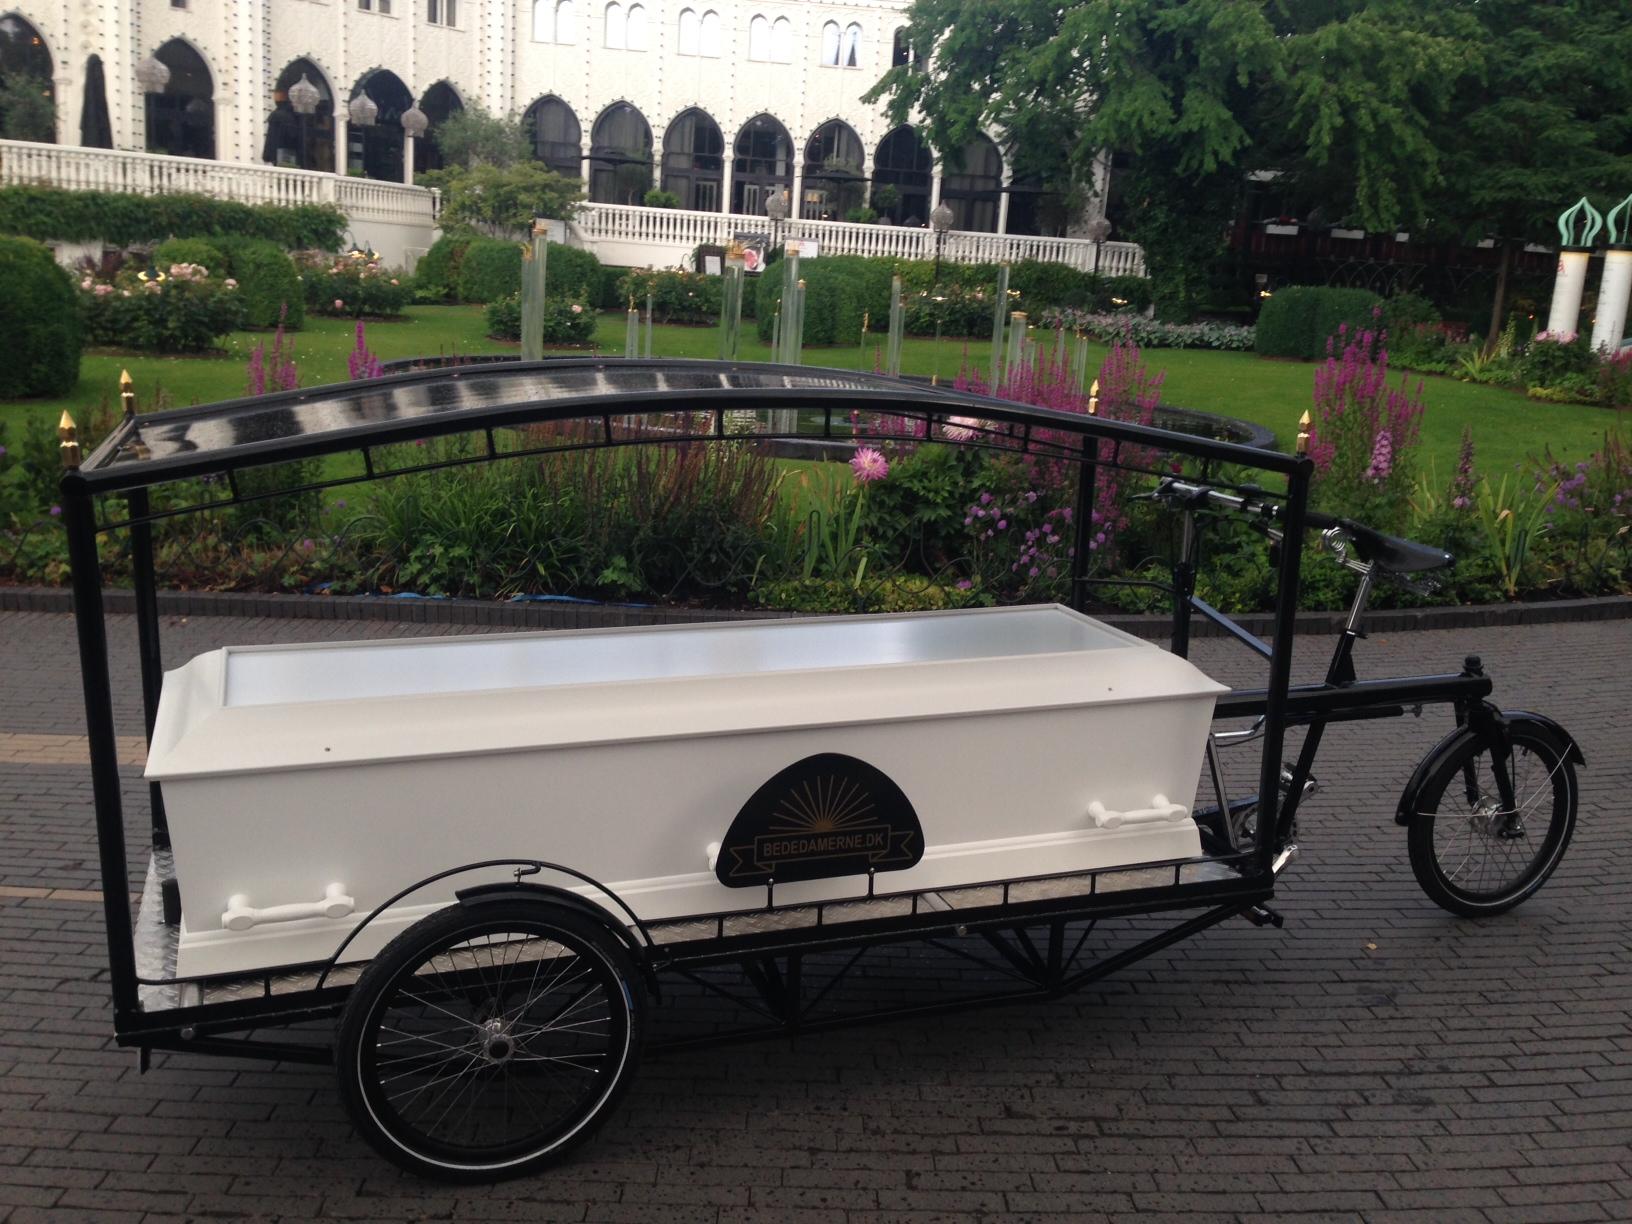 Sille Kongstad's bicycle-powered hearse is unveiled at Tivoli Gardens amusement park in Copenhagen